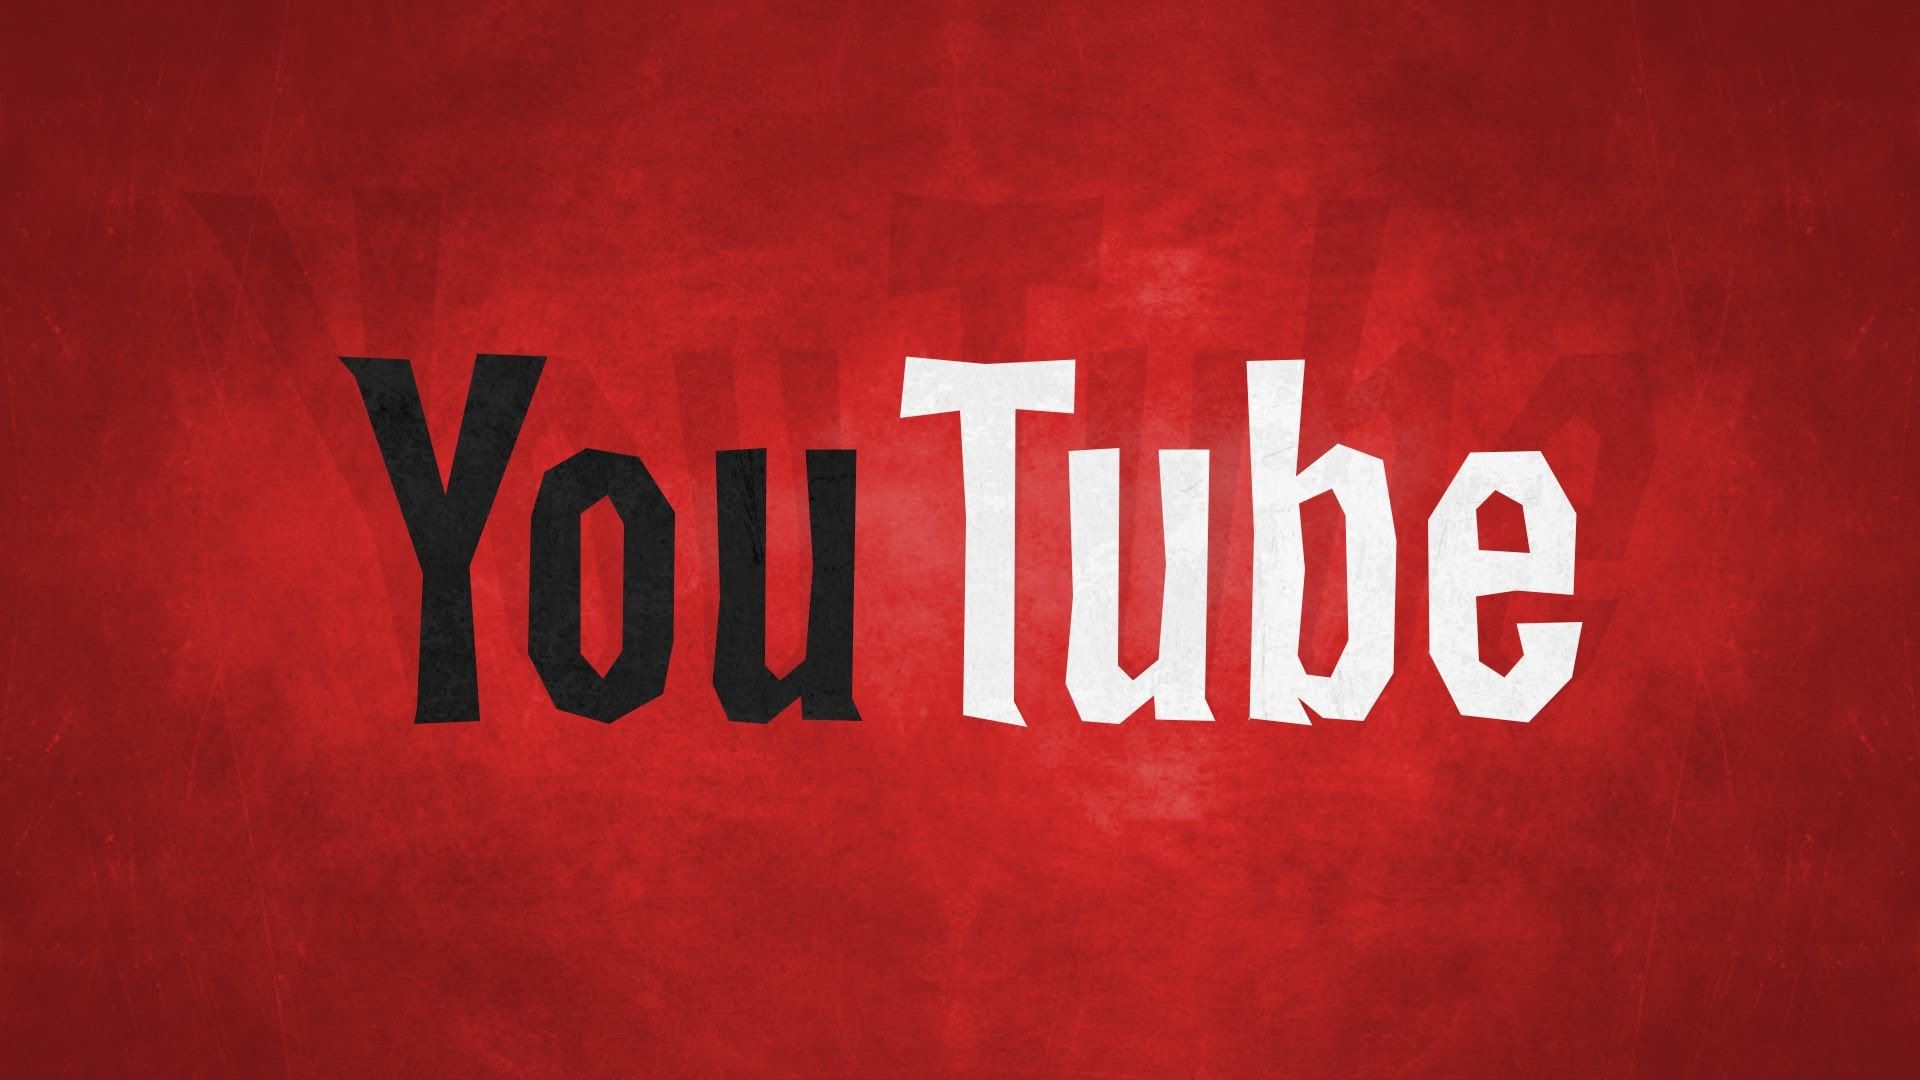 YouTube Wallpaper Image Photo Picture Background